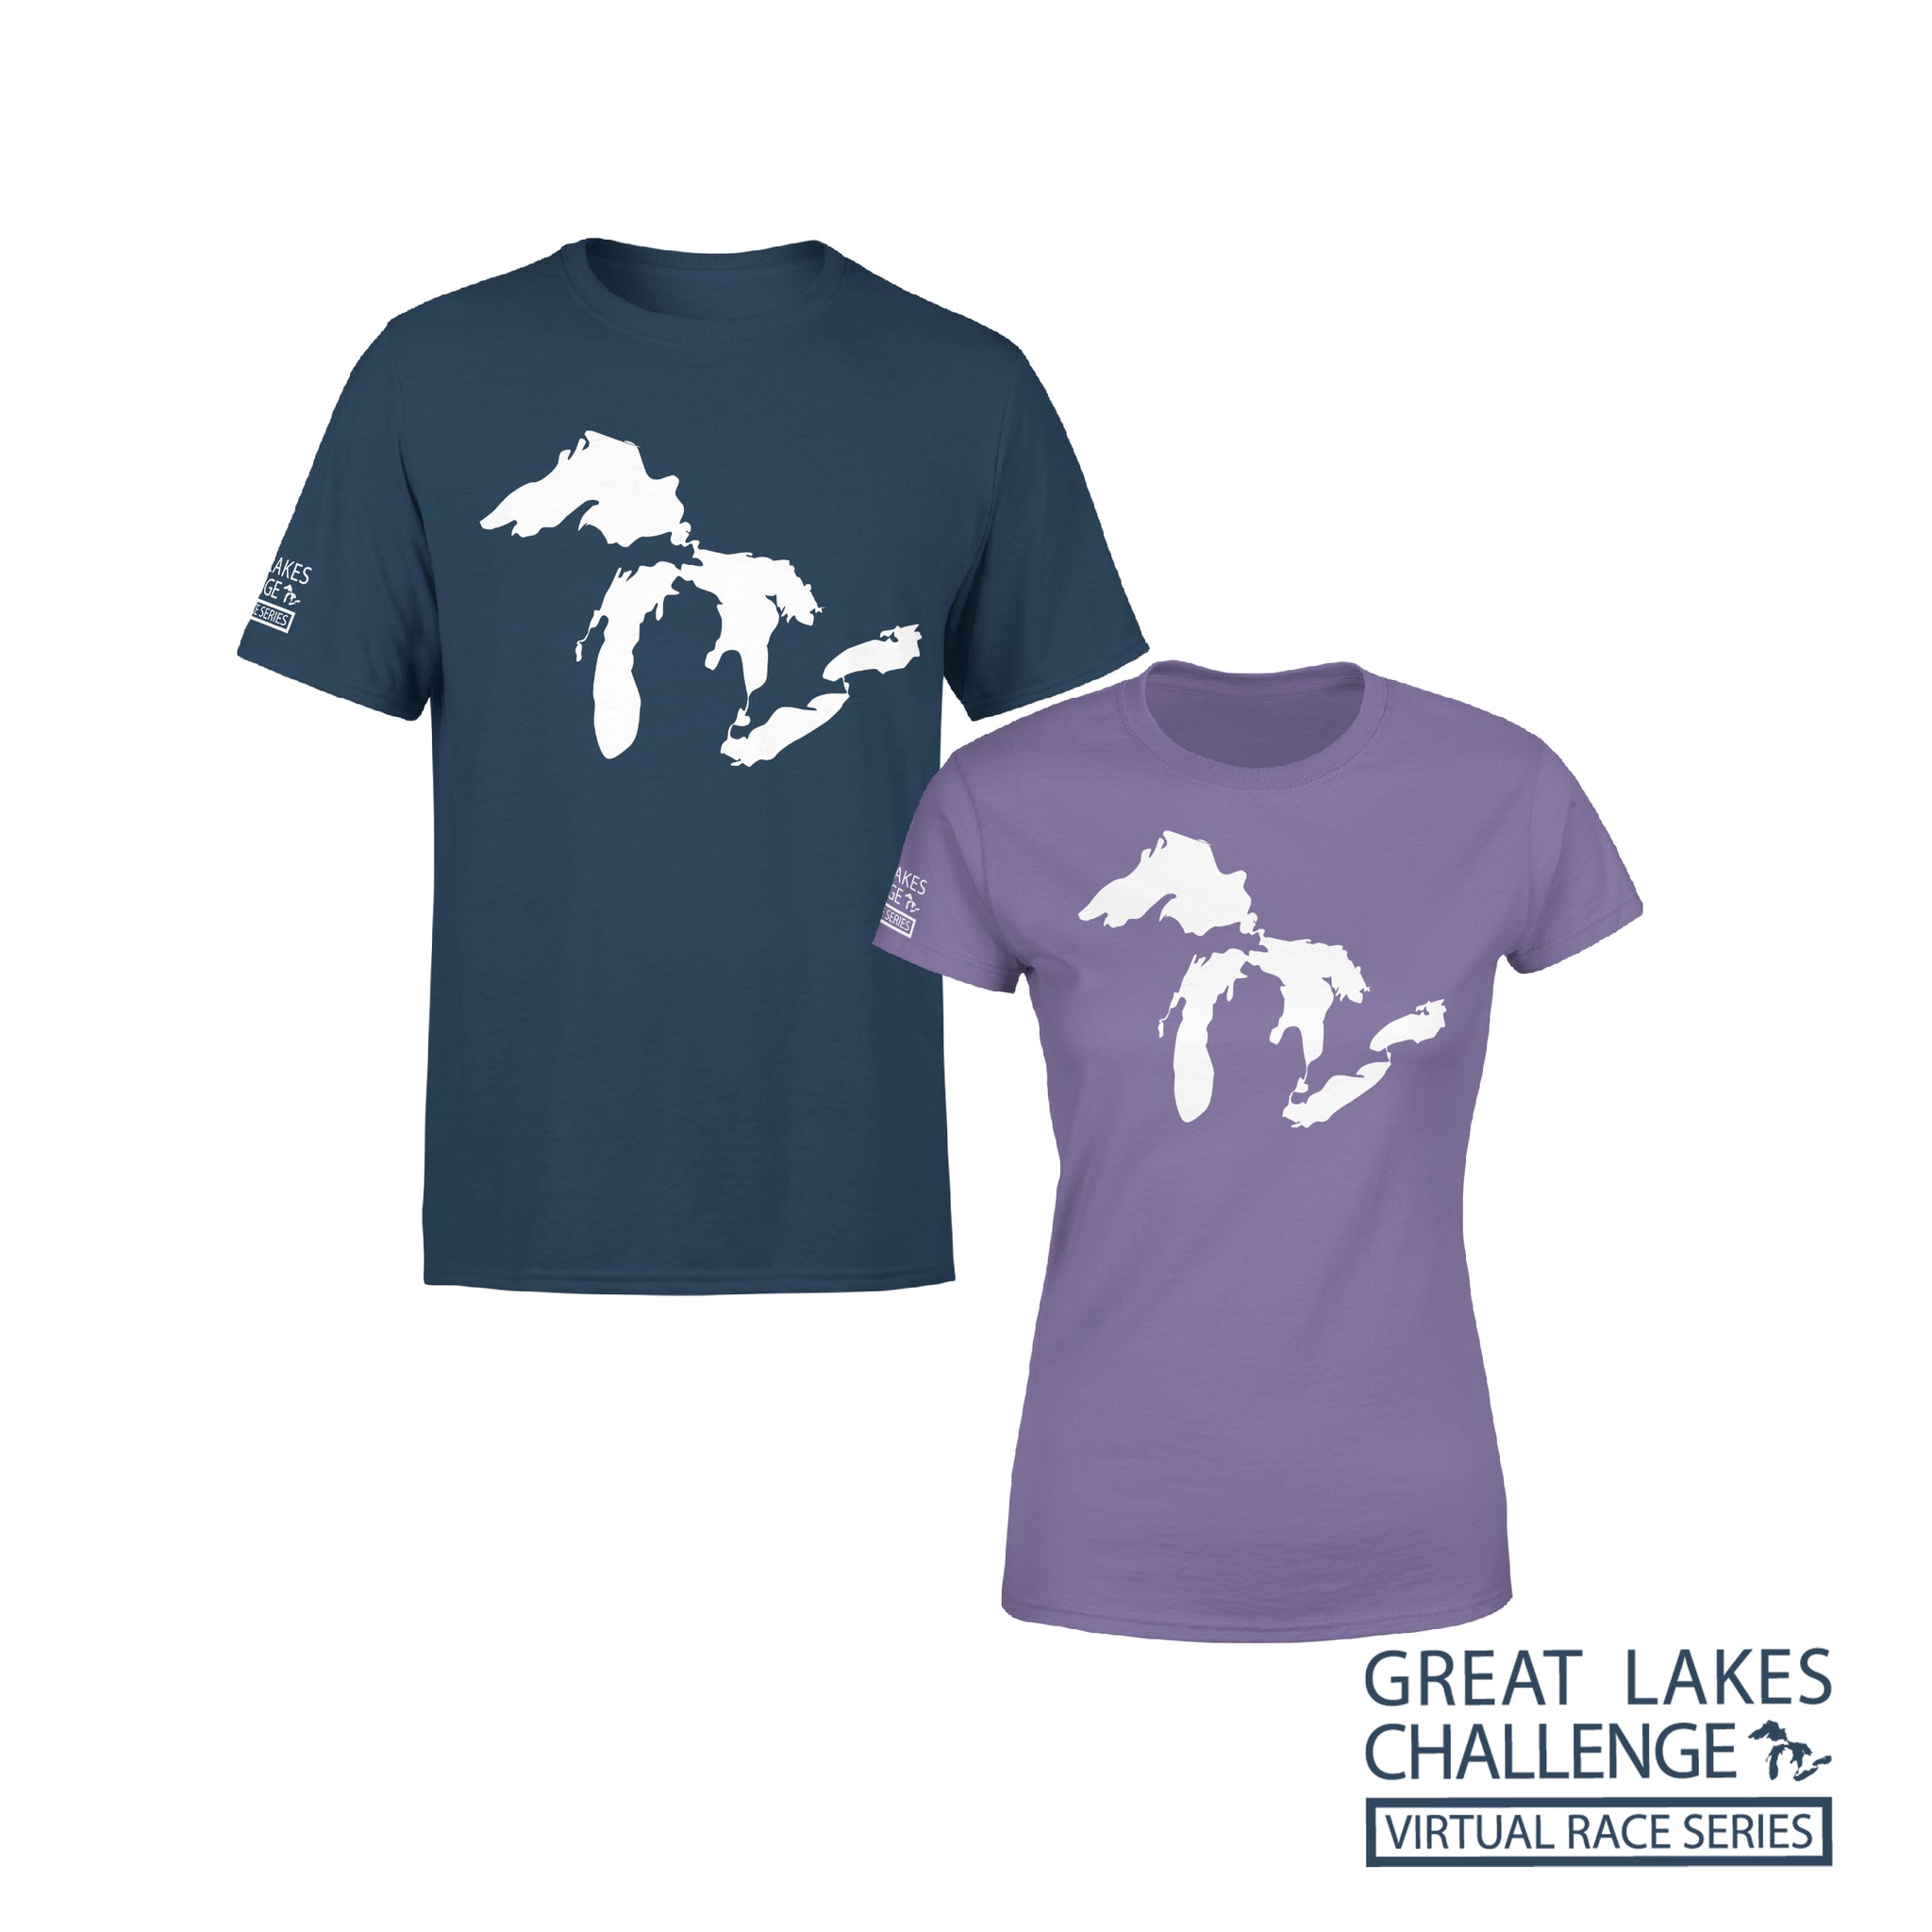 The Great Lakes Challenge Shirt